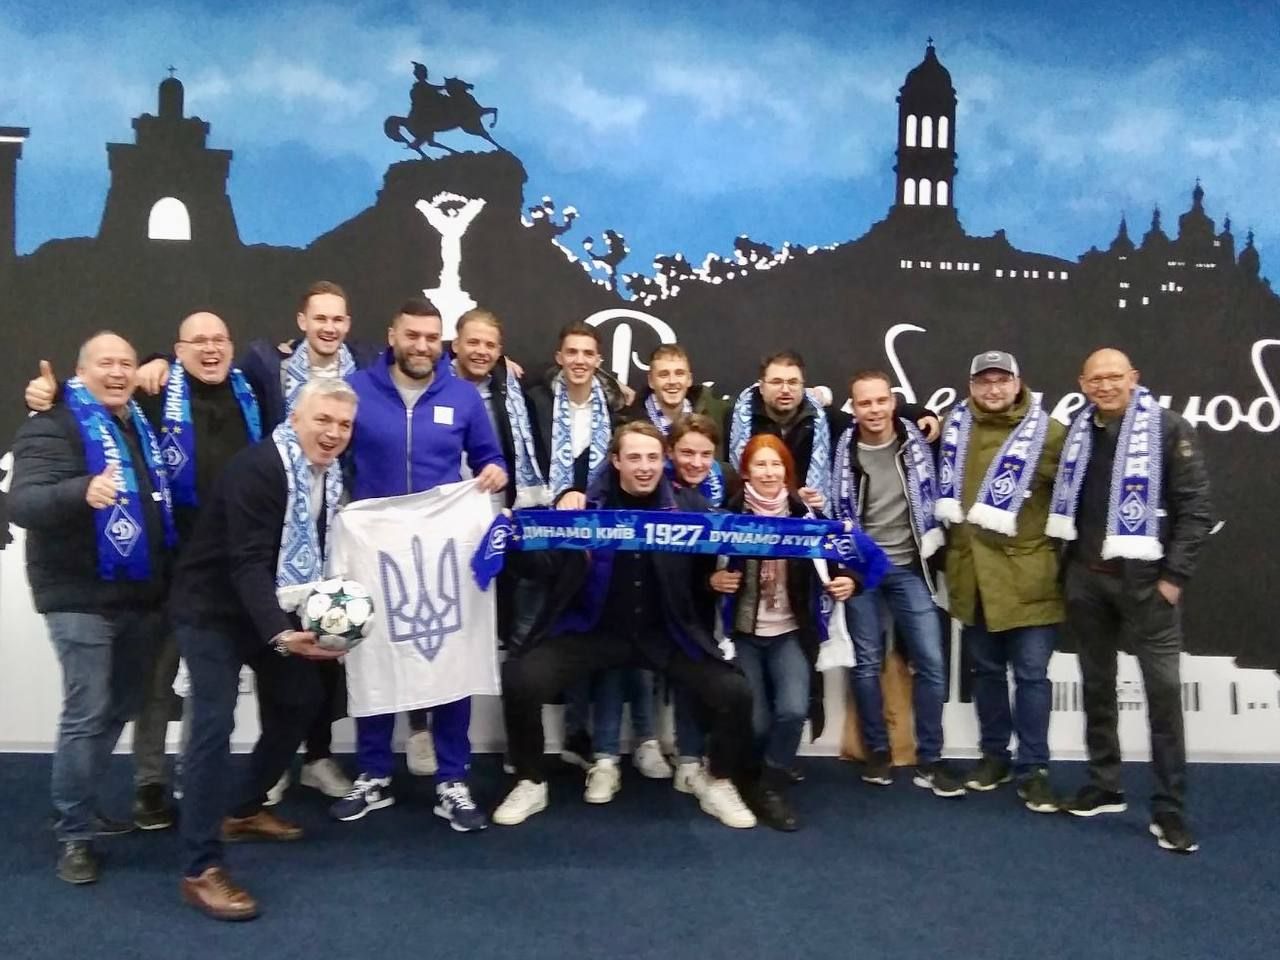 Dynamo foreign support at the game against Bayern